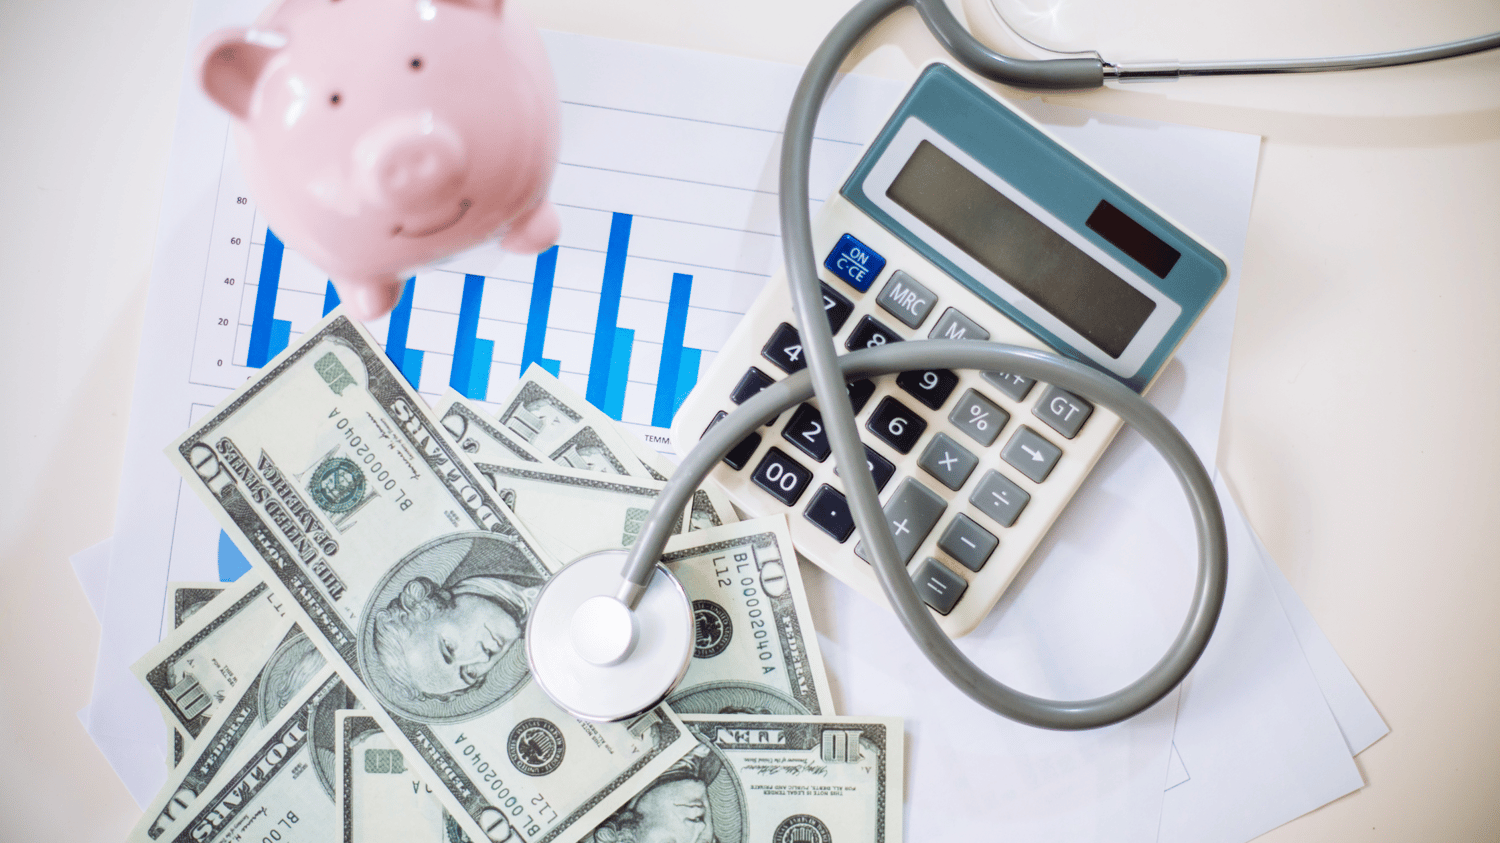 UNDERSTANDING THE DIFFERENCE BETWEEN A FLEXIBLE SPENDING ACCOUNT (FSA) AND A HEALTH SAVINGS ACCOUNT (HSA)